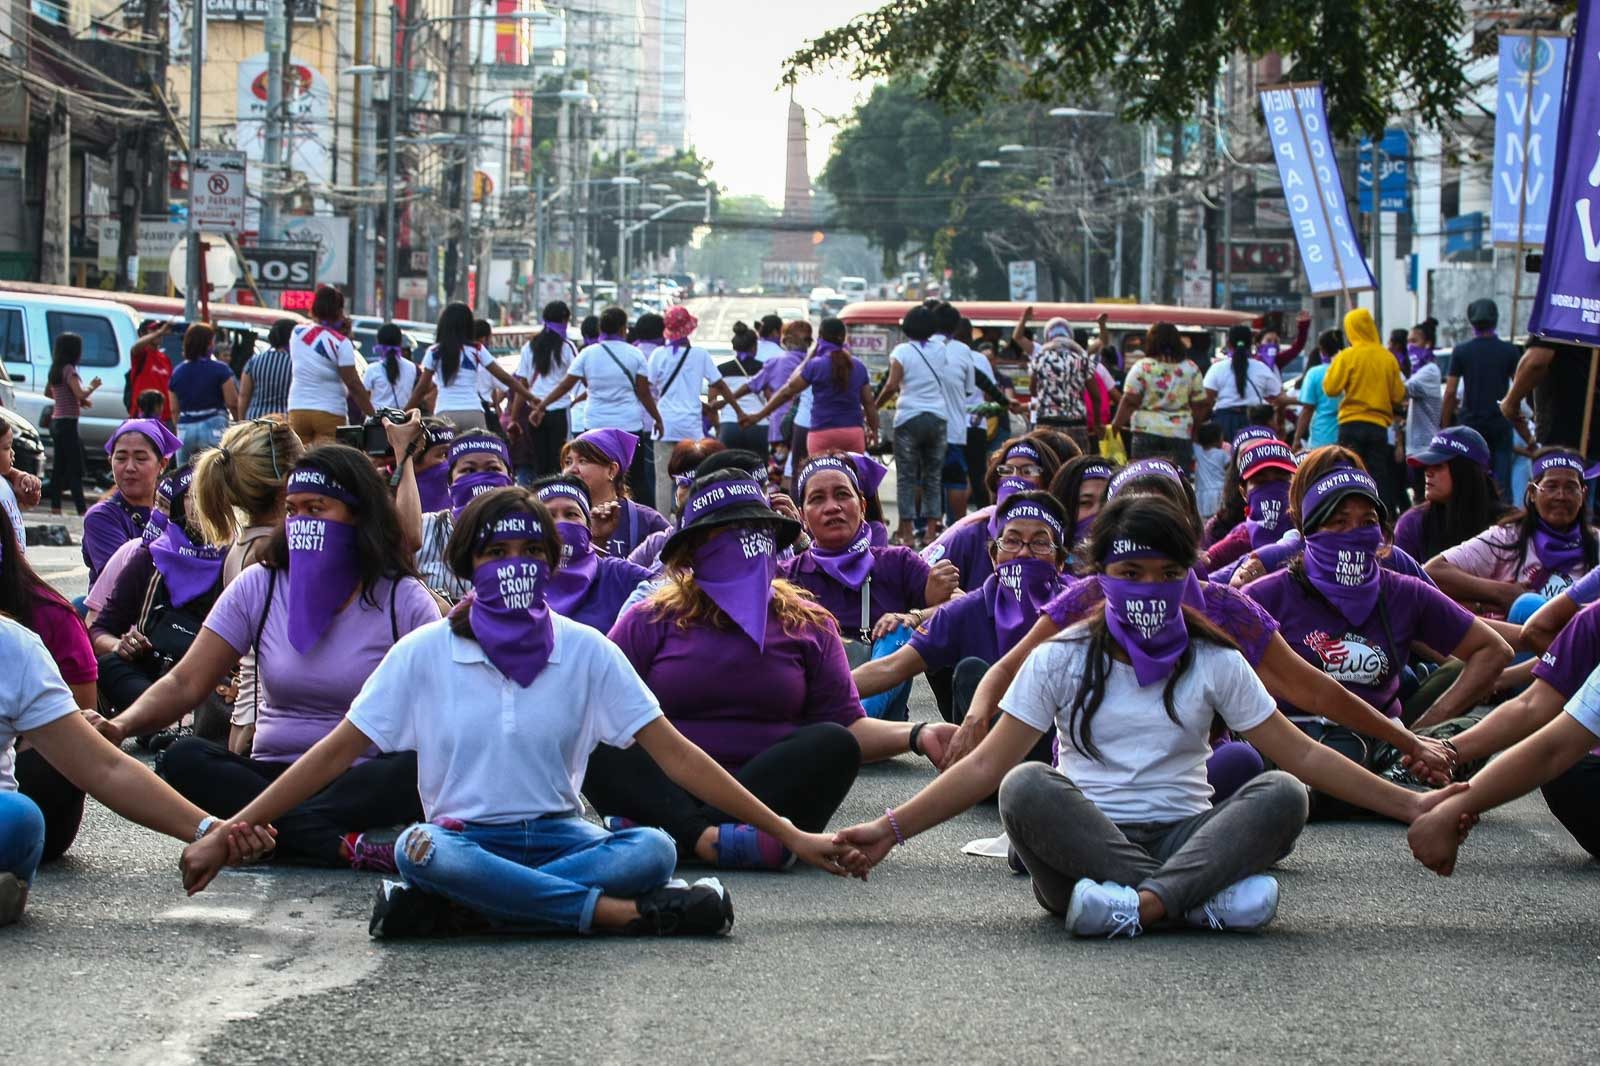 Filipinas sit-in to stop traffic, claim spaces on Int’l Women’s Day